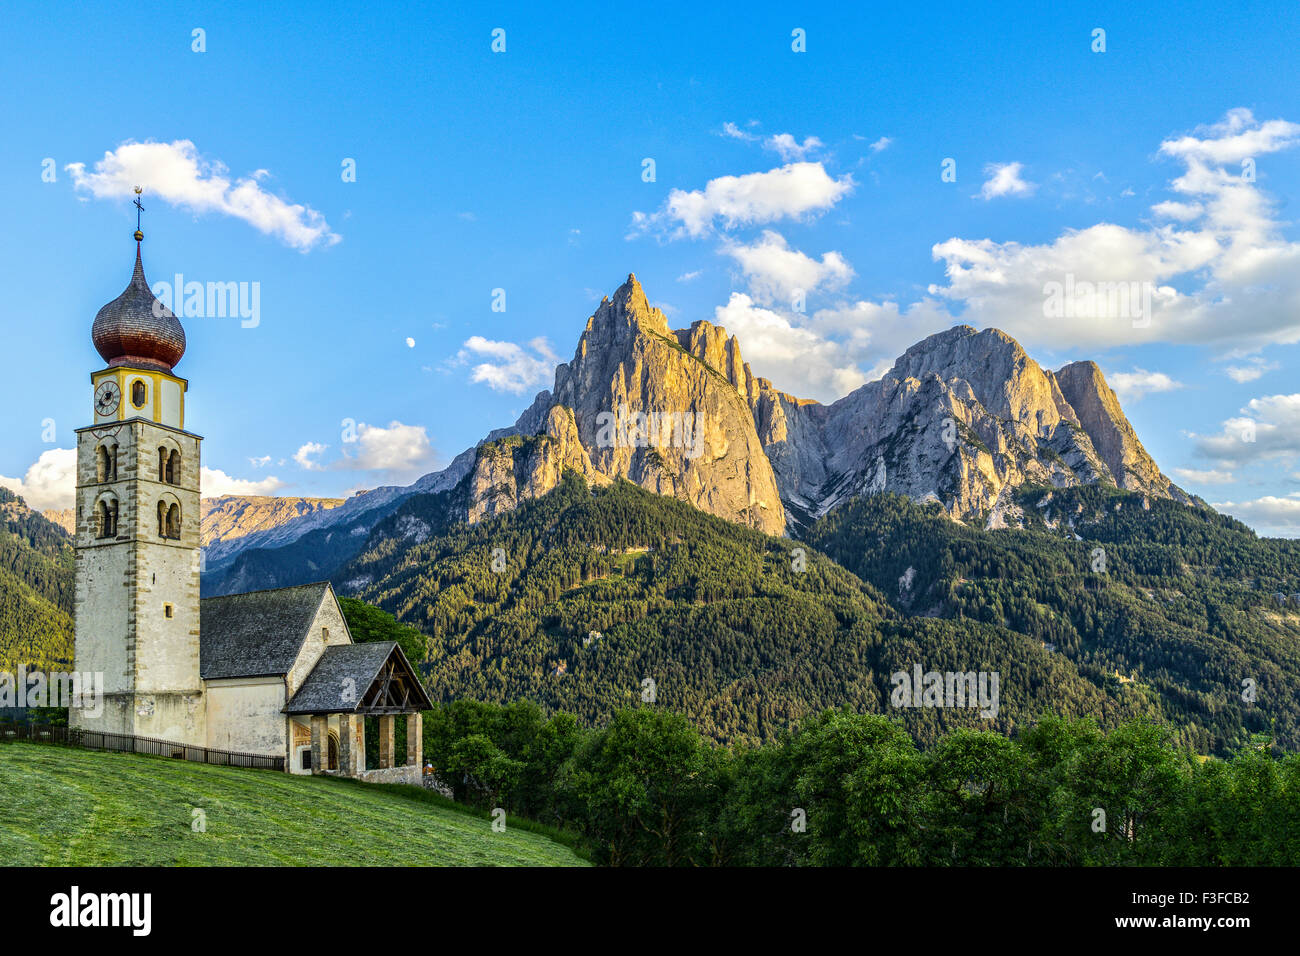 San Valentino church in front of the Schlern and moon at sunset, Siusi allo  Sciliar, Castelrotto, Dolomites, Italy Stock Photo - Alamy